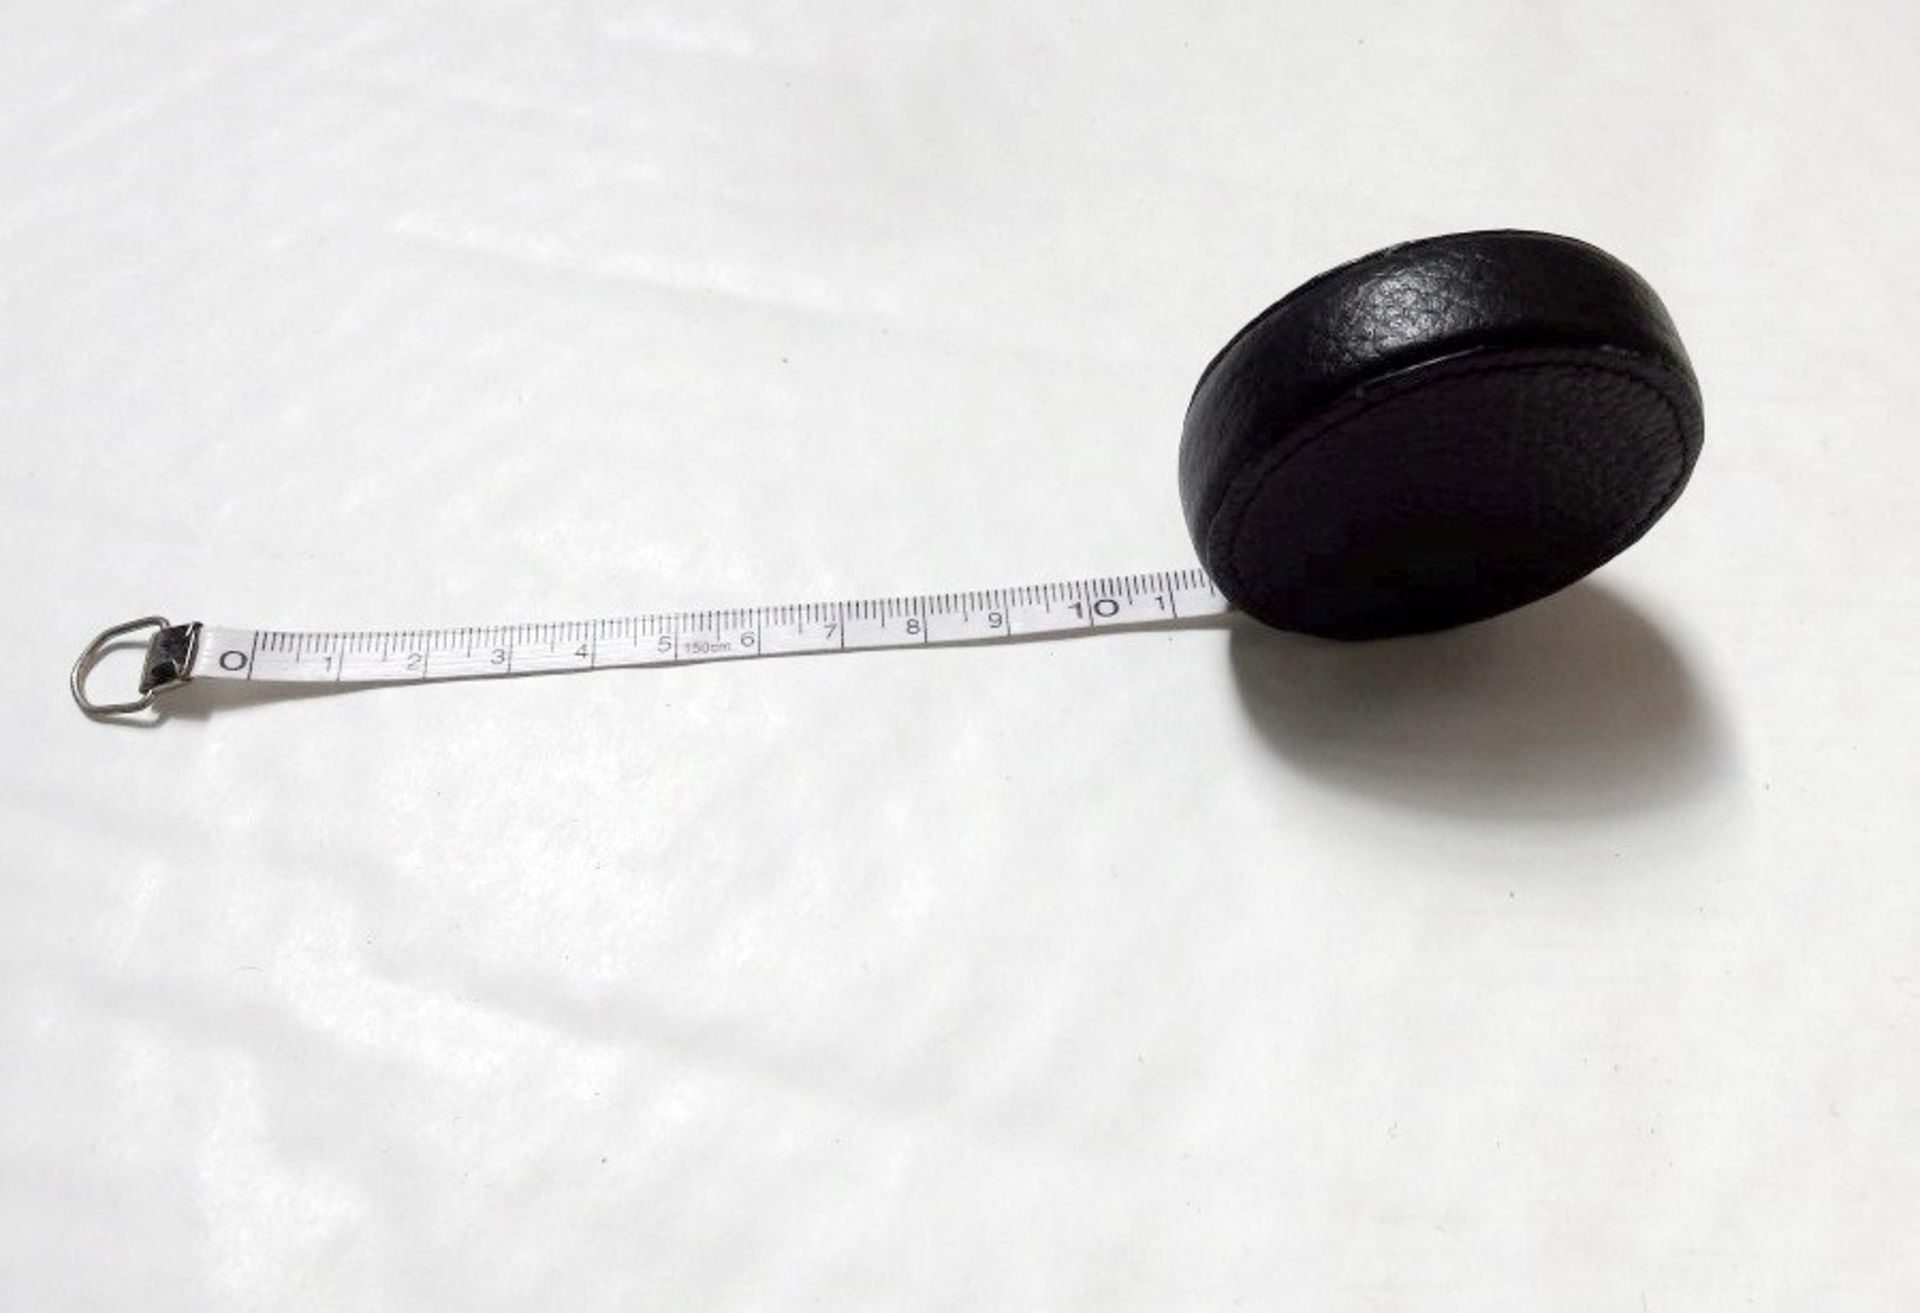 50 x Fine Leather 1.5m Tape Measures By ICE LONDON - Colour: Black - New Stock, Individually Wrapped - Image 5 of 5